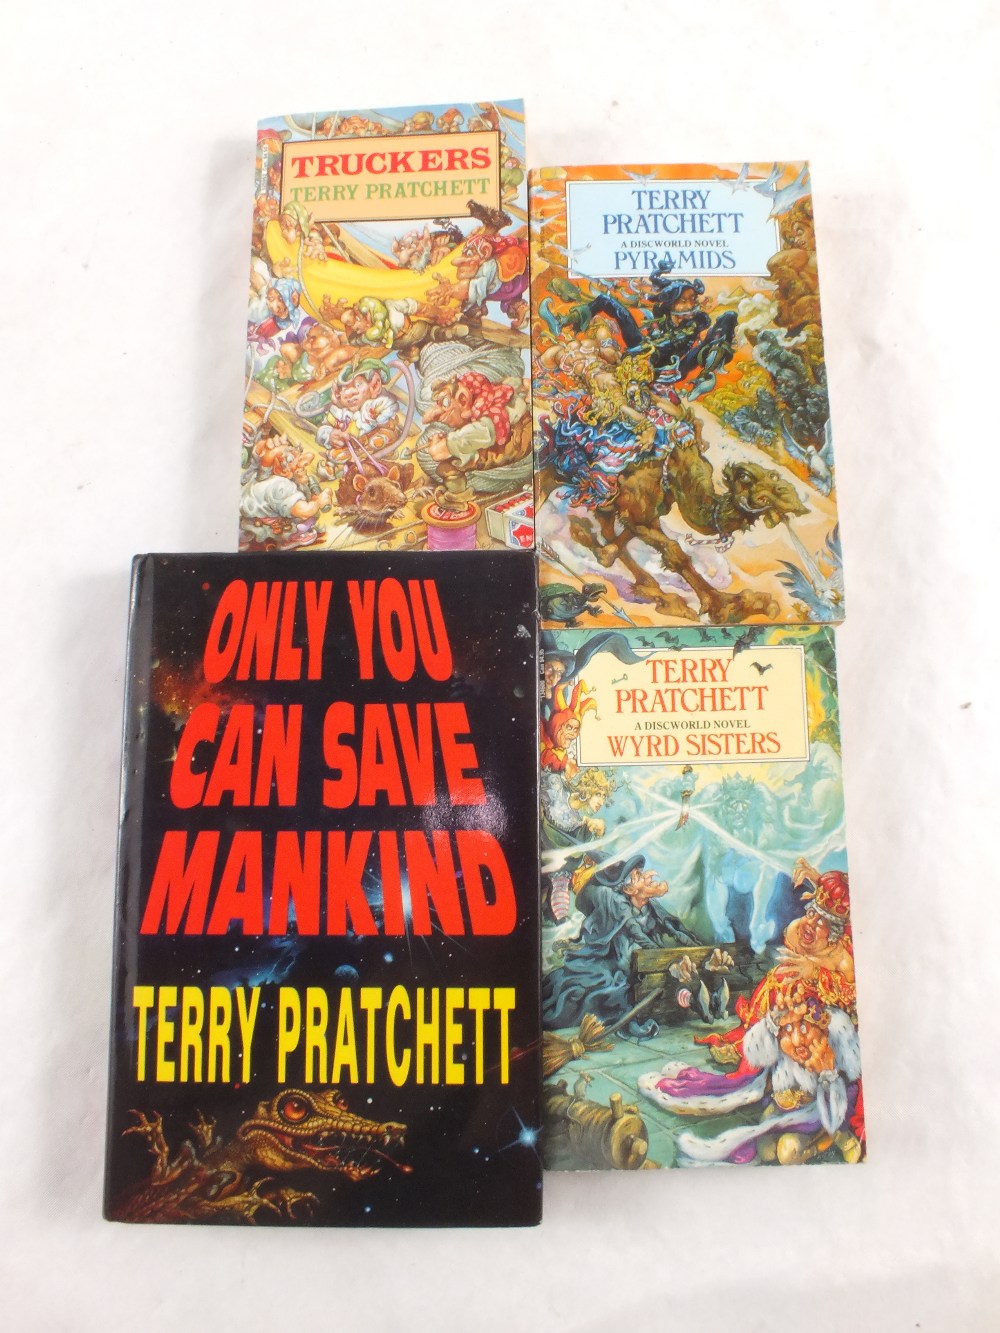 Terry Pratchett, Only You Can Save Mankind and three paperbacks, all signed copies